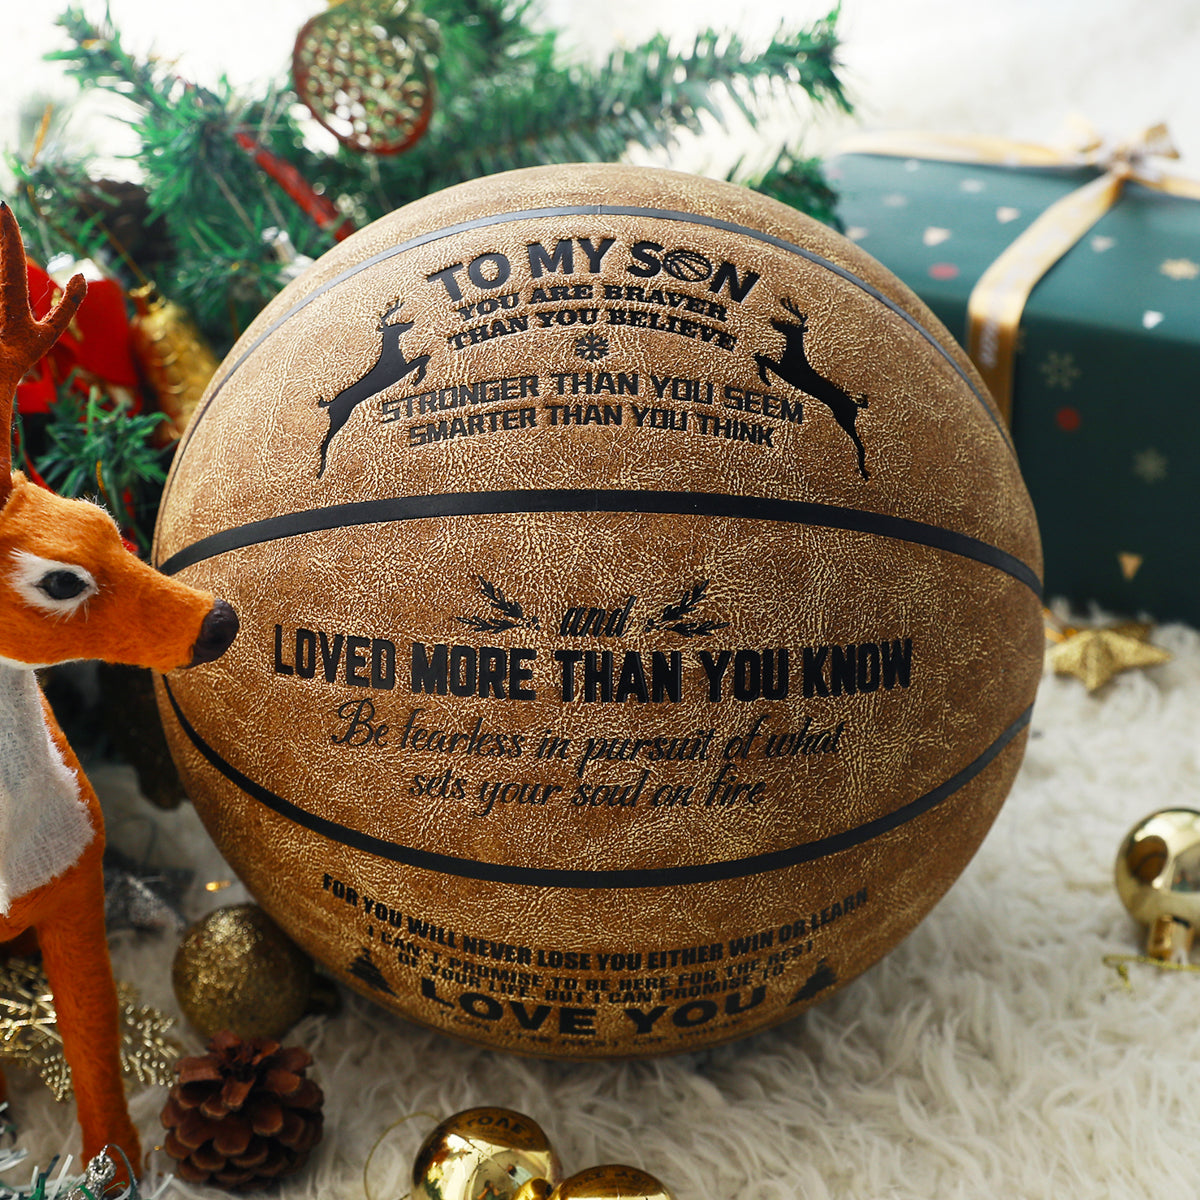 Personalized Letter Basketball For Son, Basketball Indoor/Outdoor Game Ball For Boy, Birthday Christmas Gift For Son, Christmas